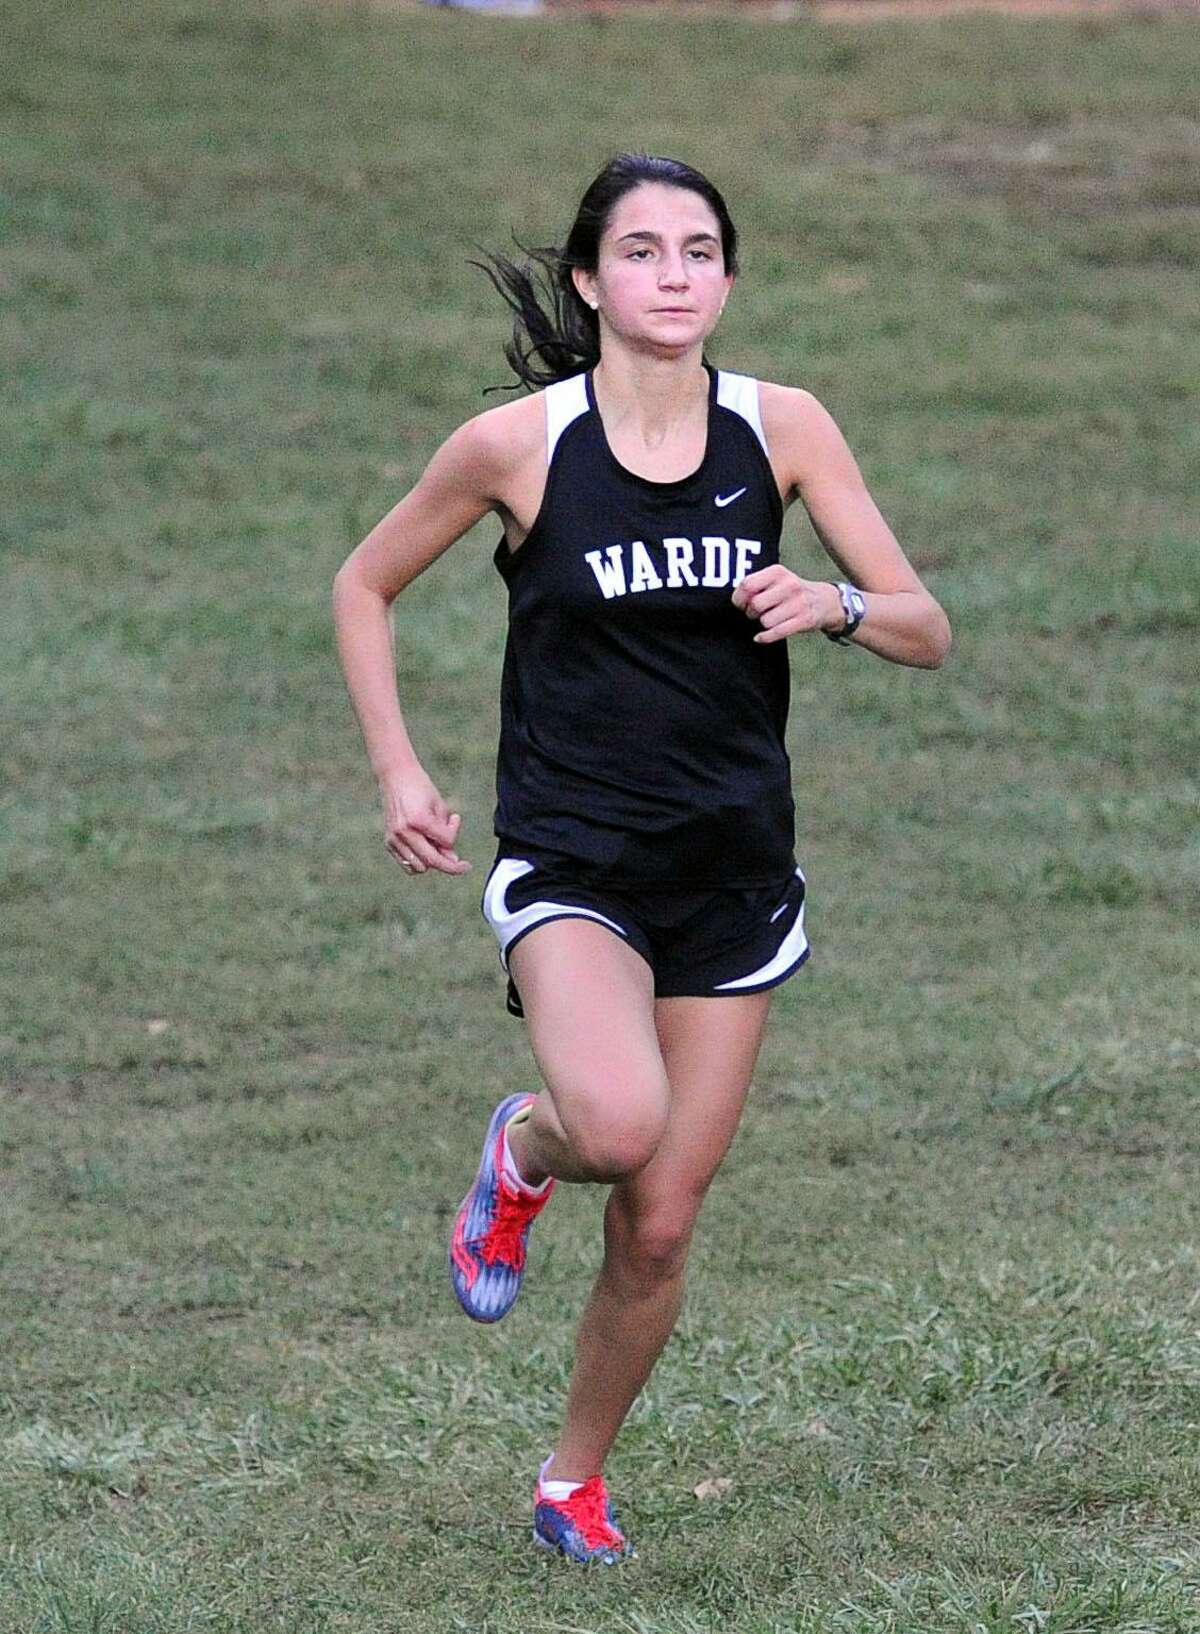 Warde’s Gabi Galletta, shown competing in the FCIAC cross country meet, placed 21st in the 3,200 race at the New England championships and finished second in the Class LL and third in the State Open indoor track 3,200-meter races.